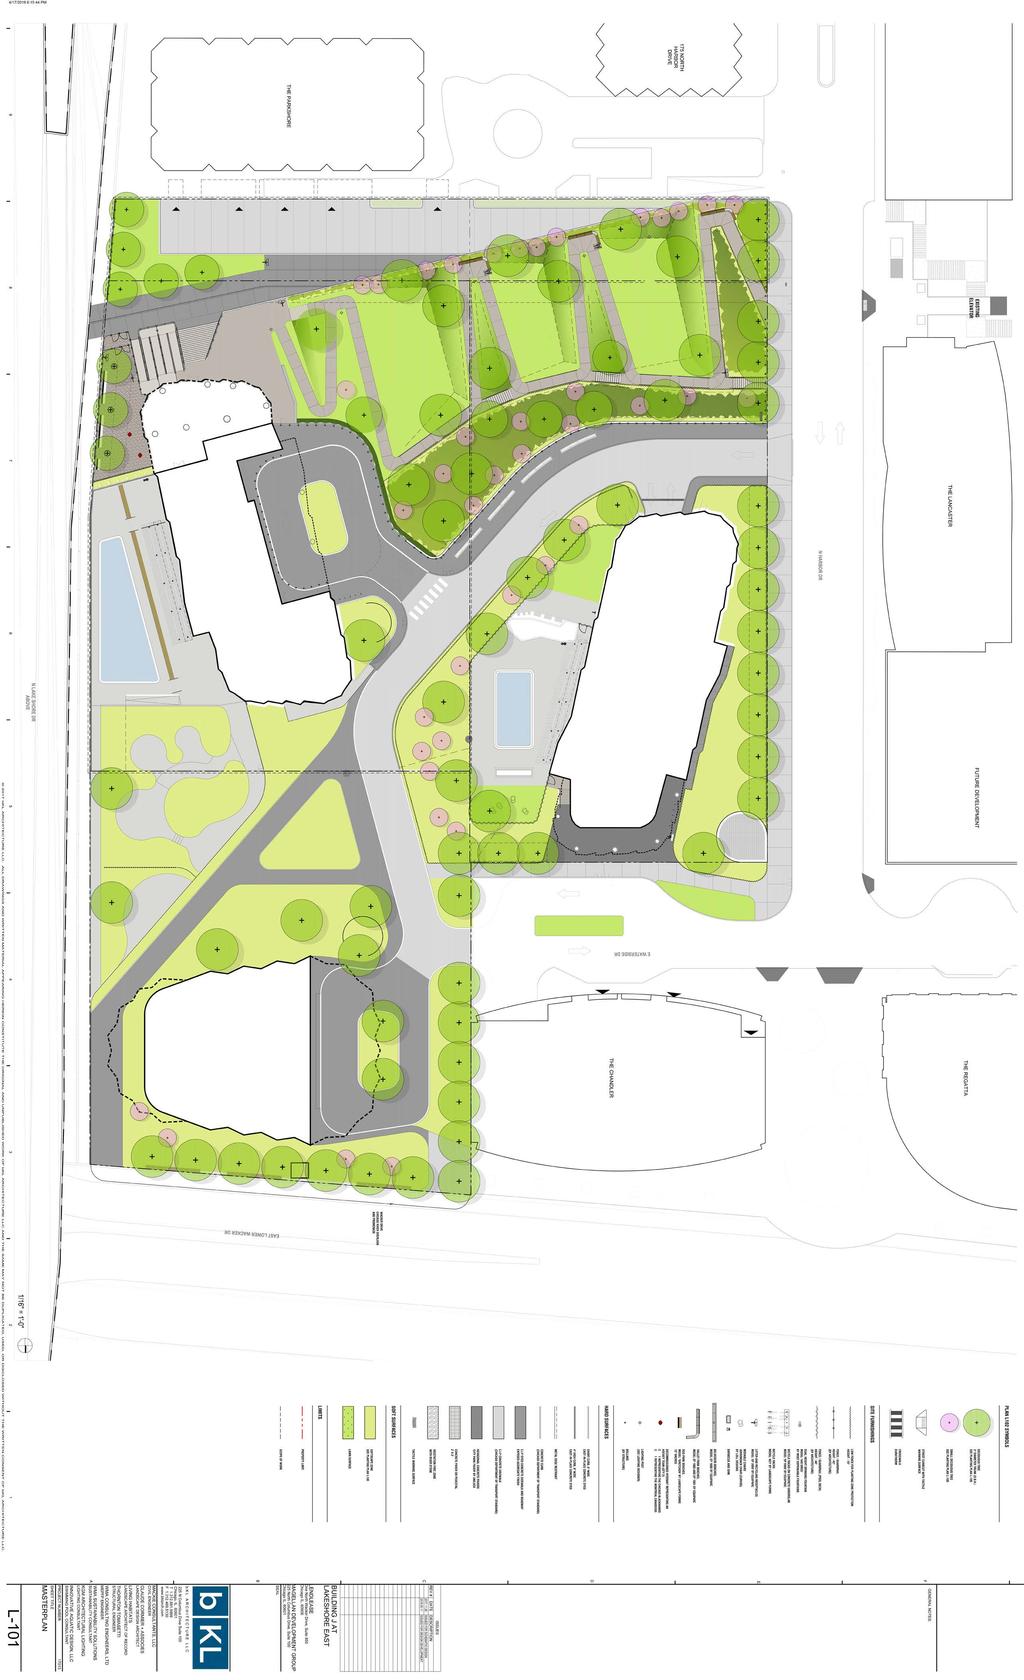 MODIFICATION IMPLEMENTED: MORE USABLE, CONTIGUOUS & ACTIVE GREEN SPACE PROVIDED 4 ROAD SHIFTED NORTH BY 46 TO ENLARGE PARK SPACE BUILDING J BUILDING K/L VALLEY SLOPE (SHRUBS) ACCESSIBLE PATH 5% MAX.